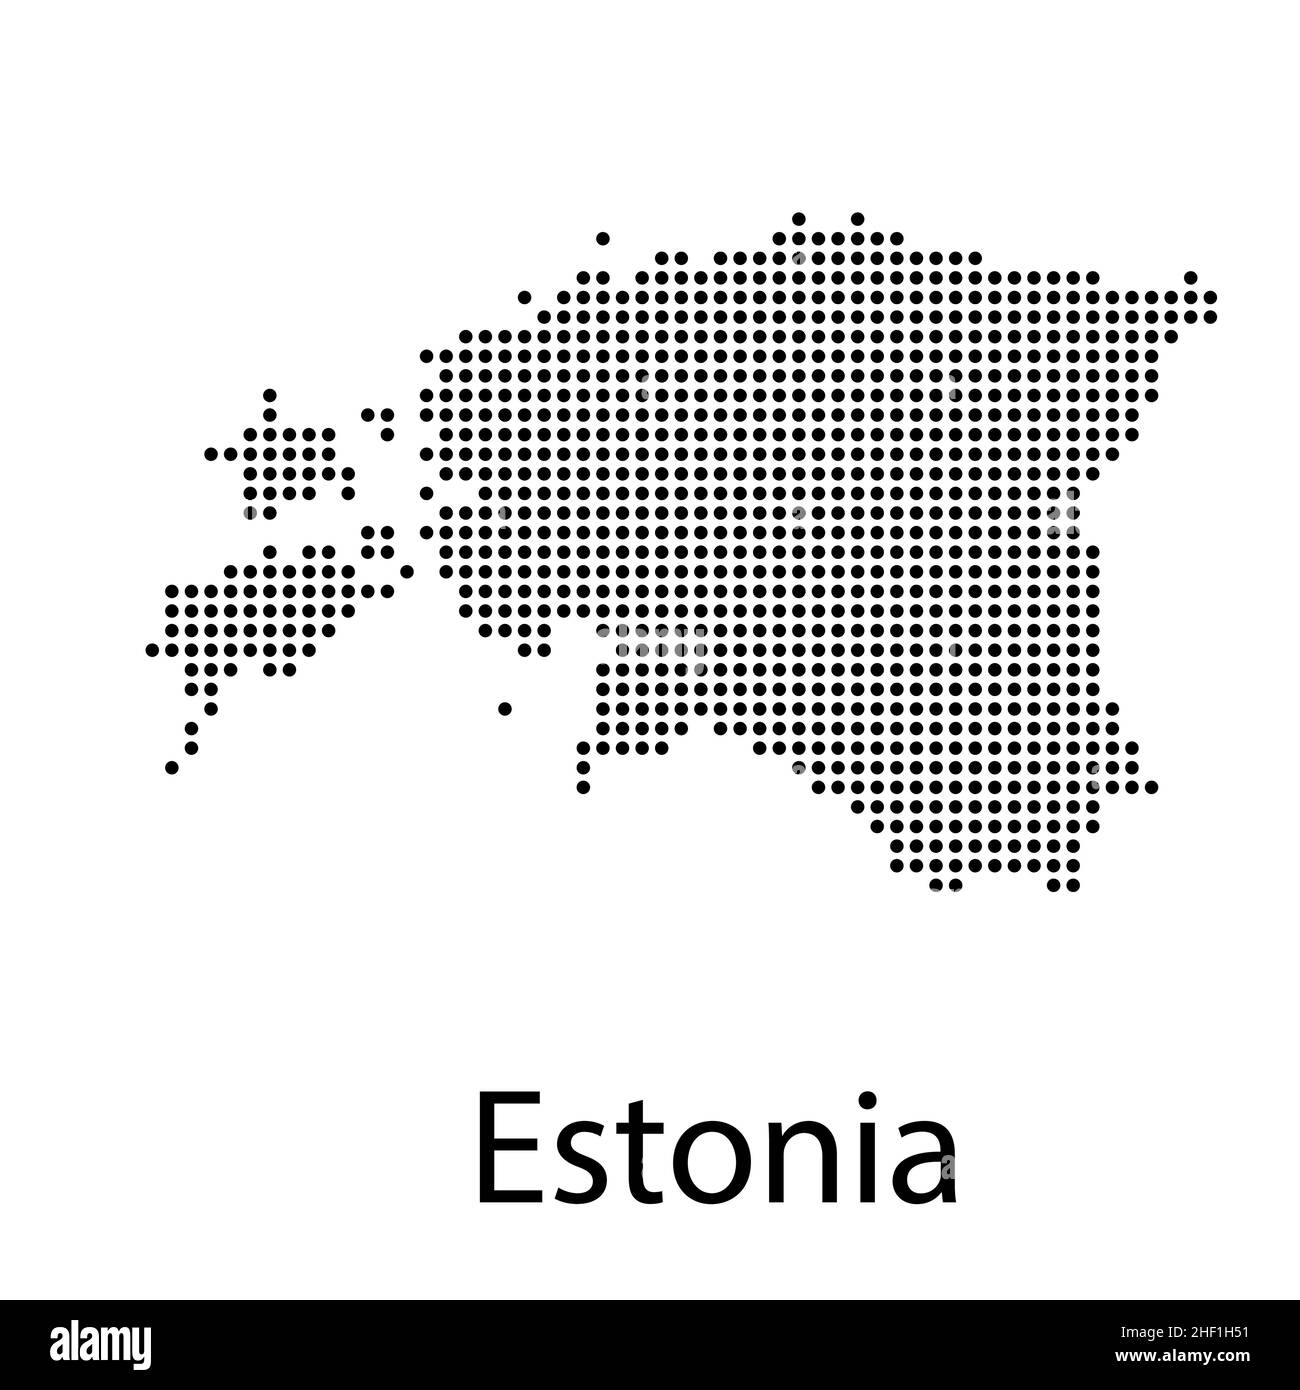 Estonia vector map with the flag inside. vector illustration Stock Vector